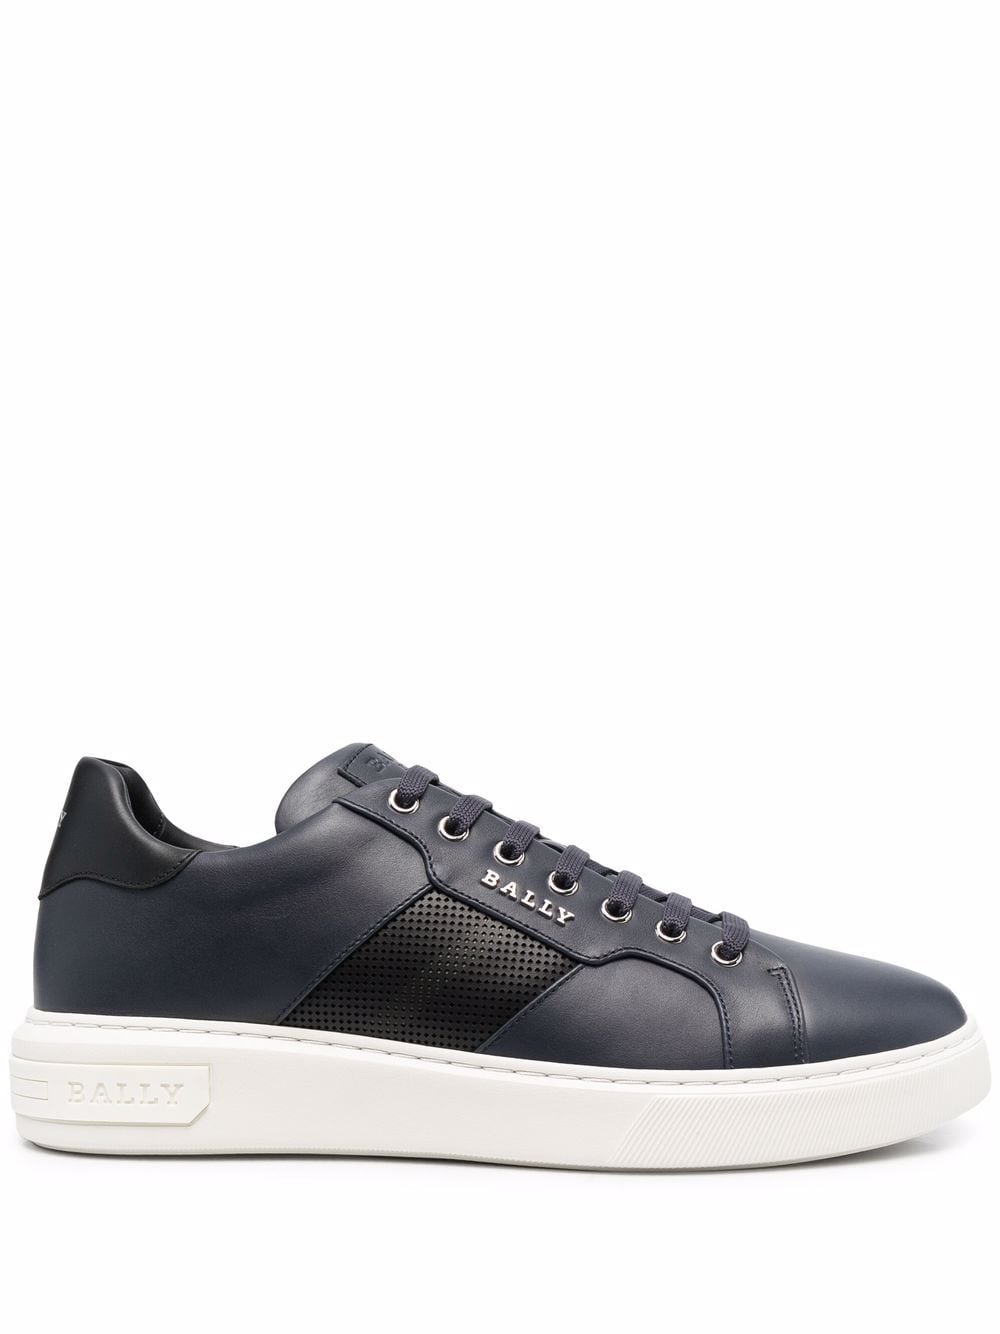 Shop Bally Myko panelled low-top sneakers with Express Delivery - FARFETCH